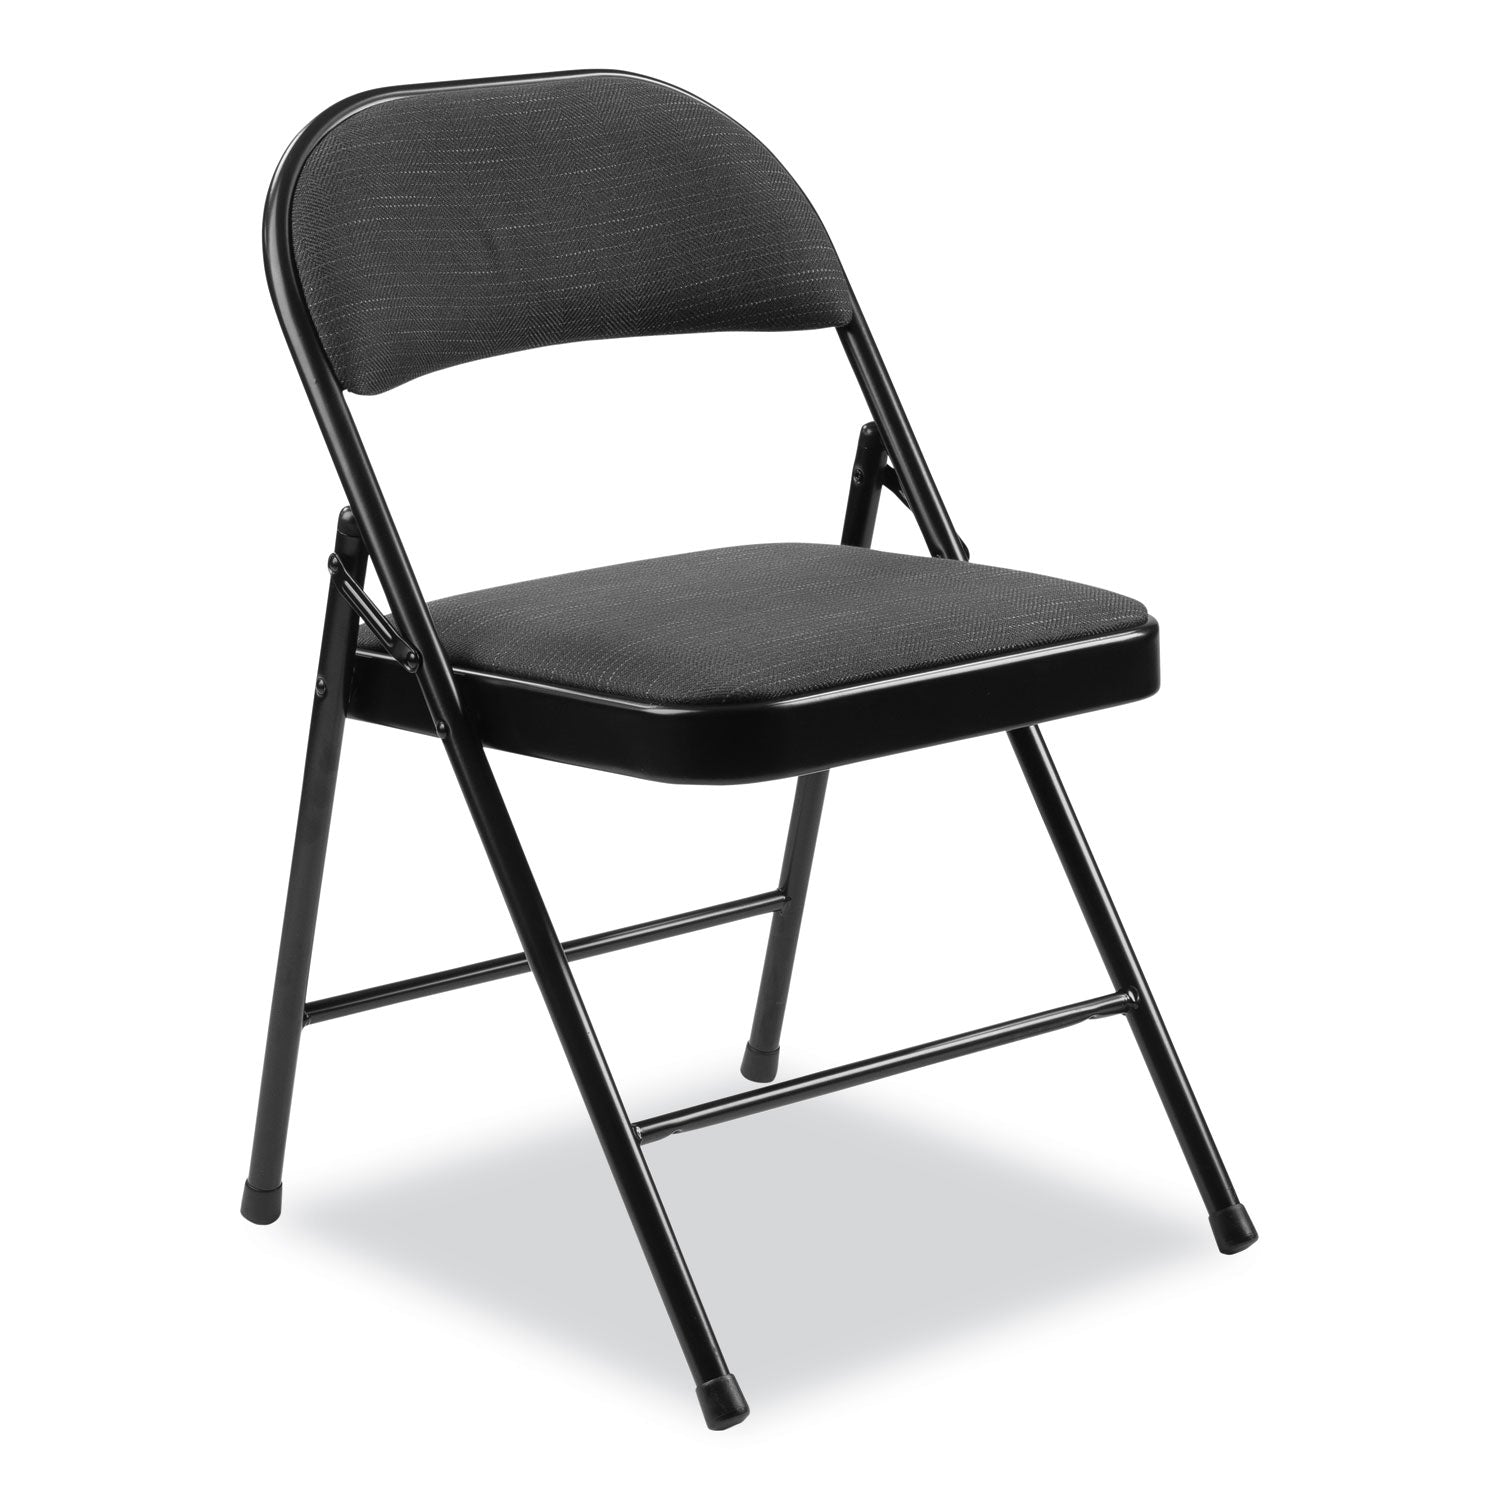 970-series-fabric-padded-steel-folding-chair-supports-250-lb-1775-seat-ht-star-trail-black-4-ct-ships-in-1-3-bus-days_nps970 - 2